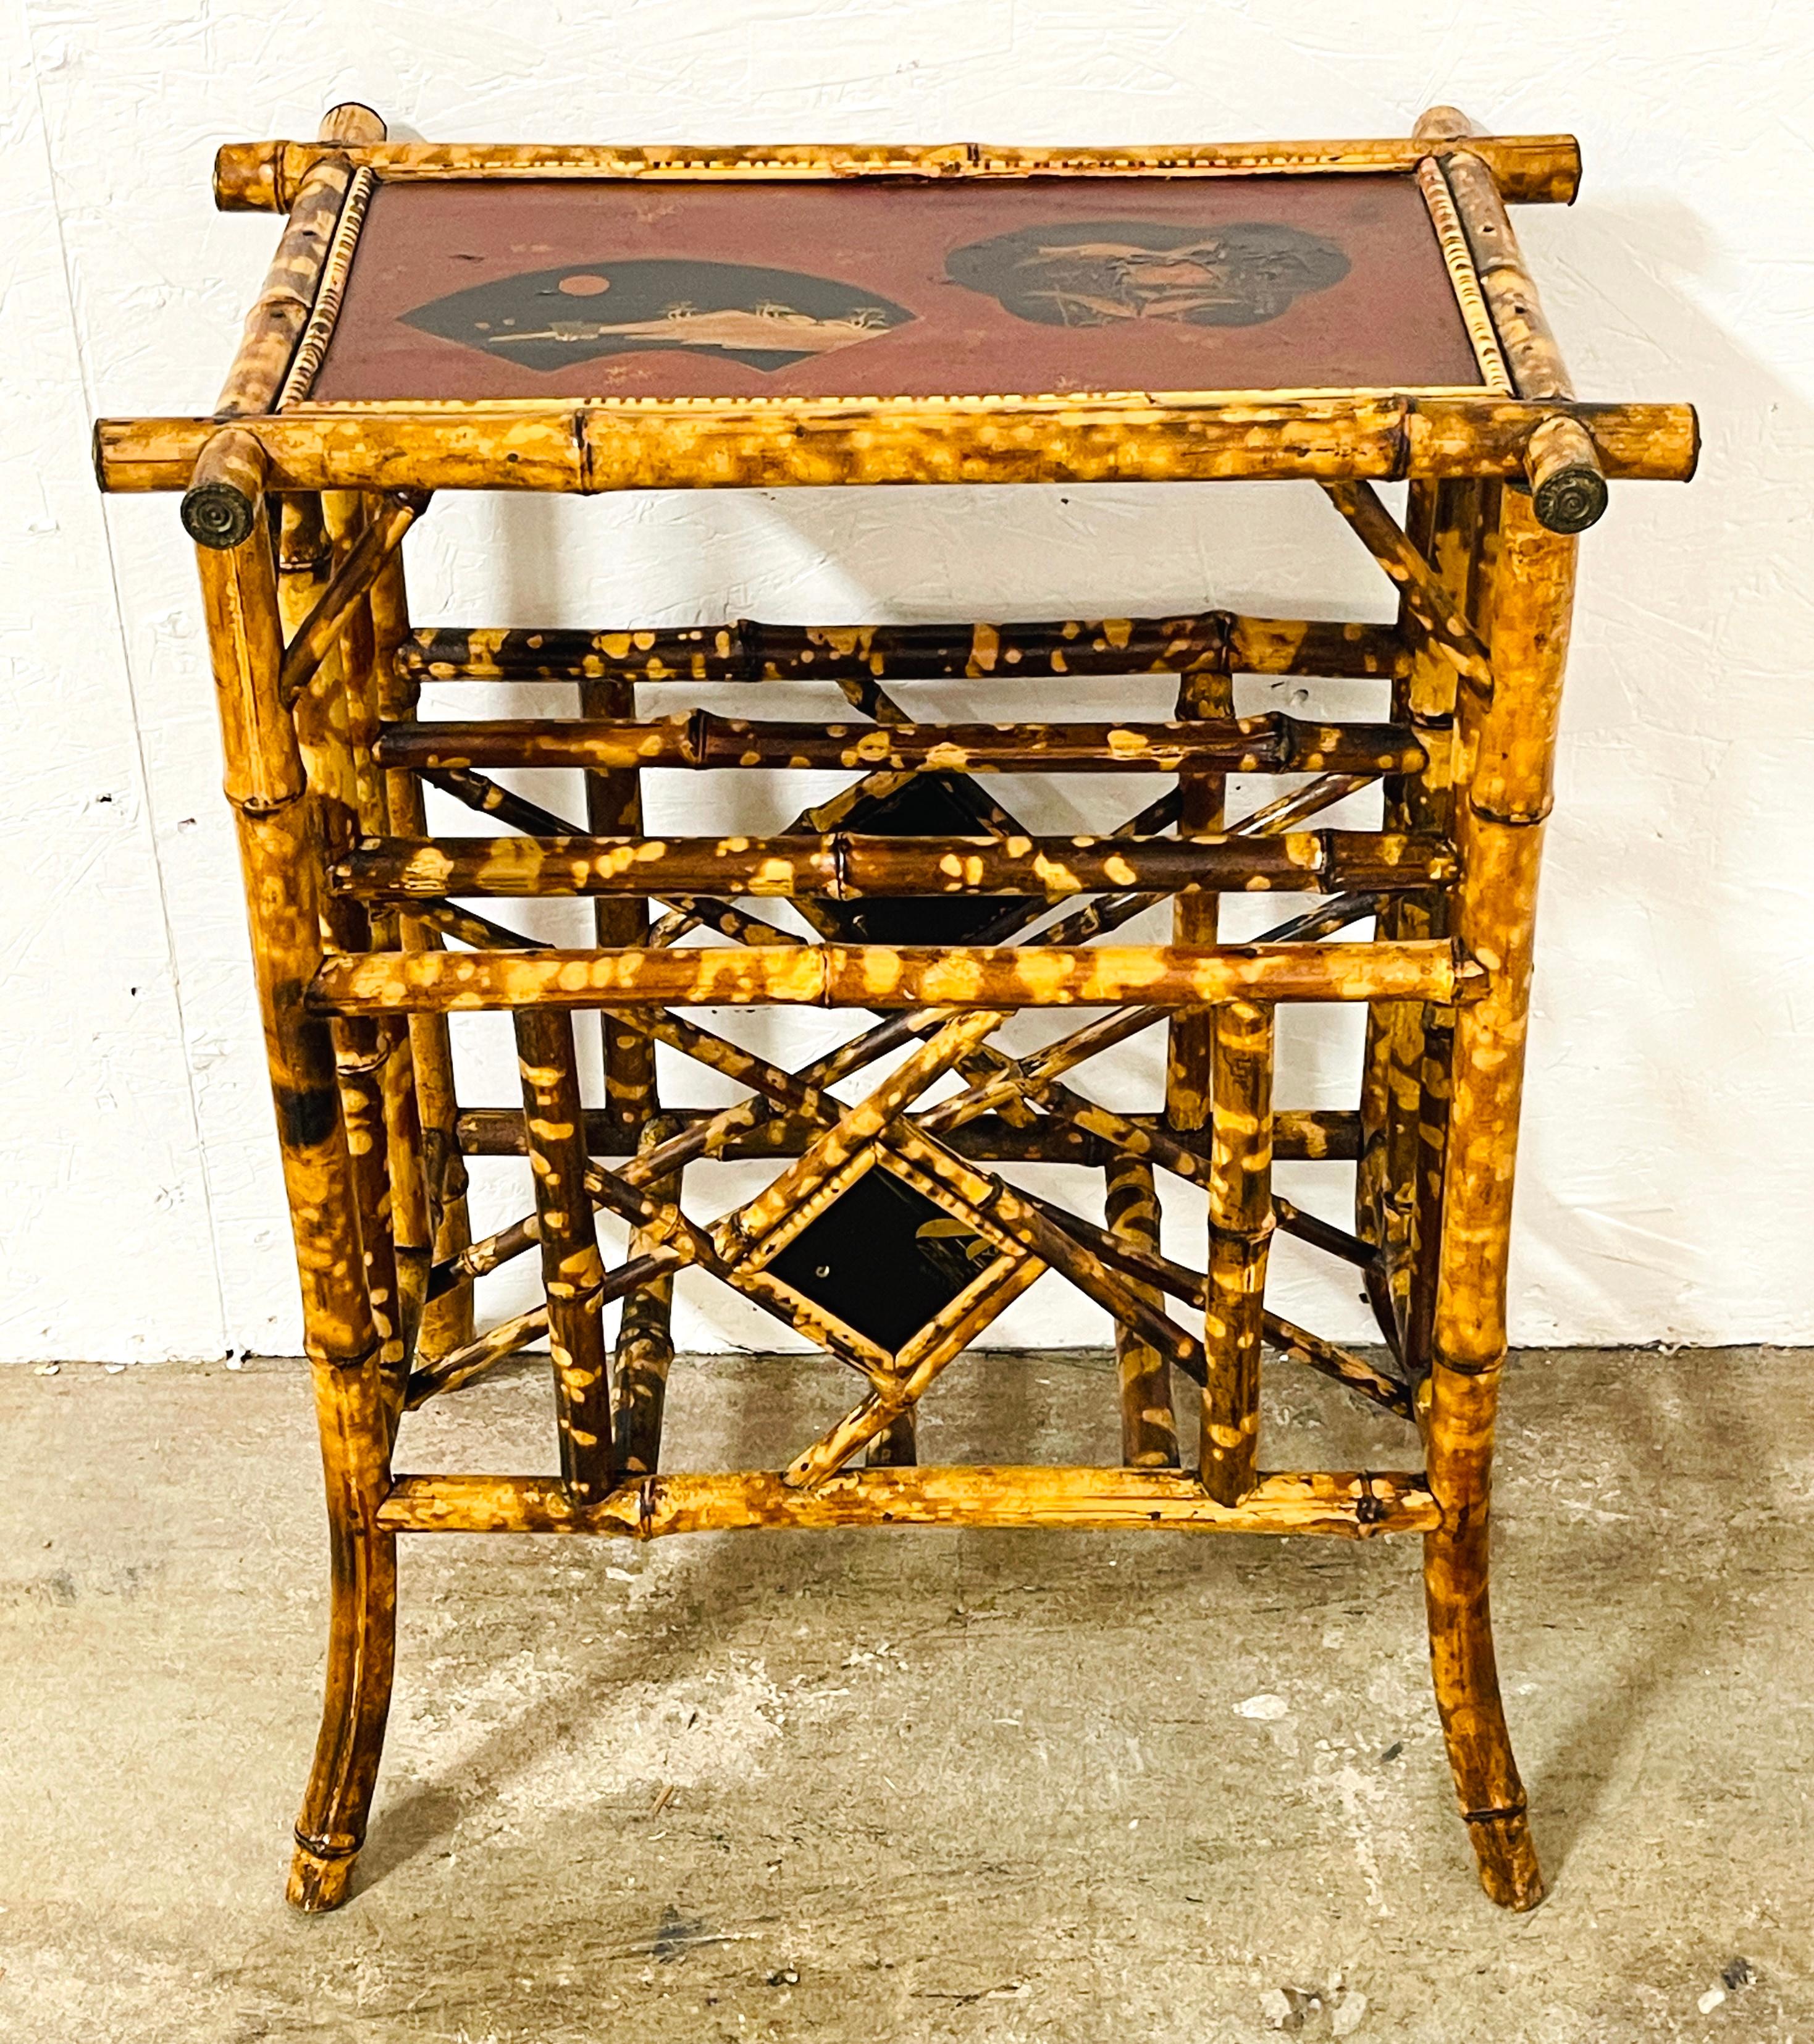 French Aesthetic /Japonisme Red Lacquer Bamboo Side Table, Circa 1880s
A splendid French Aesthetic /Japonisme Red Lacquer Bamboo Side Table, made in the 1880s. Embodying the essence of the French Aesthetic movement influenced by Japonisme, this